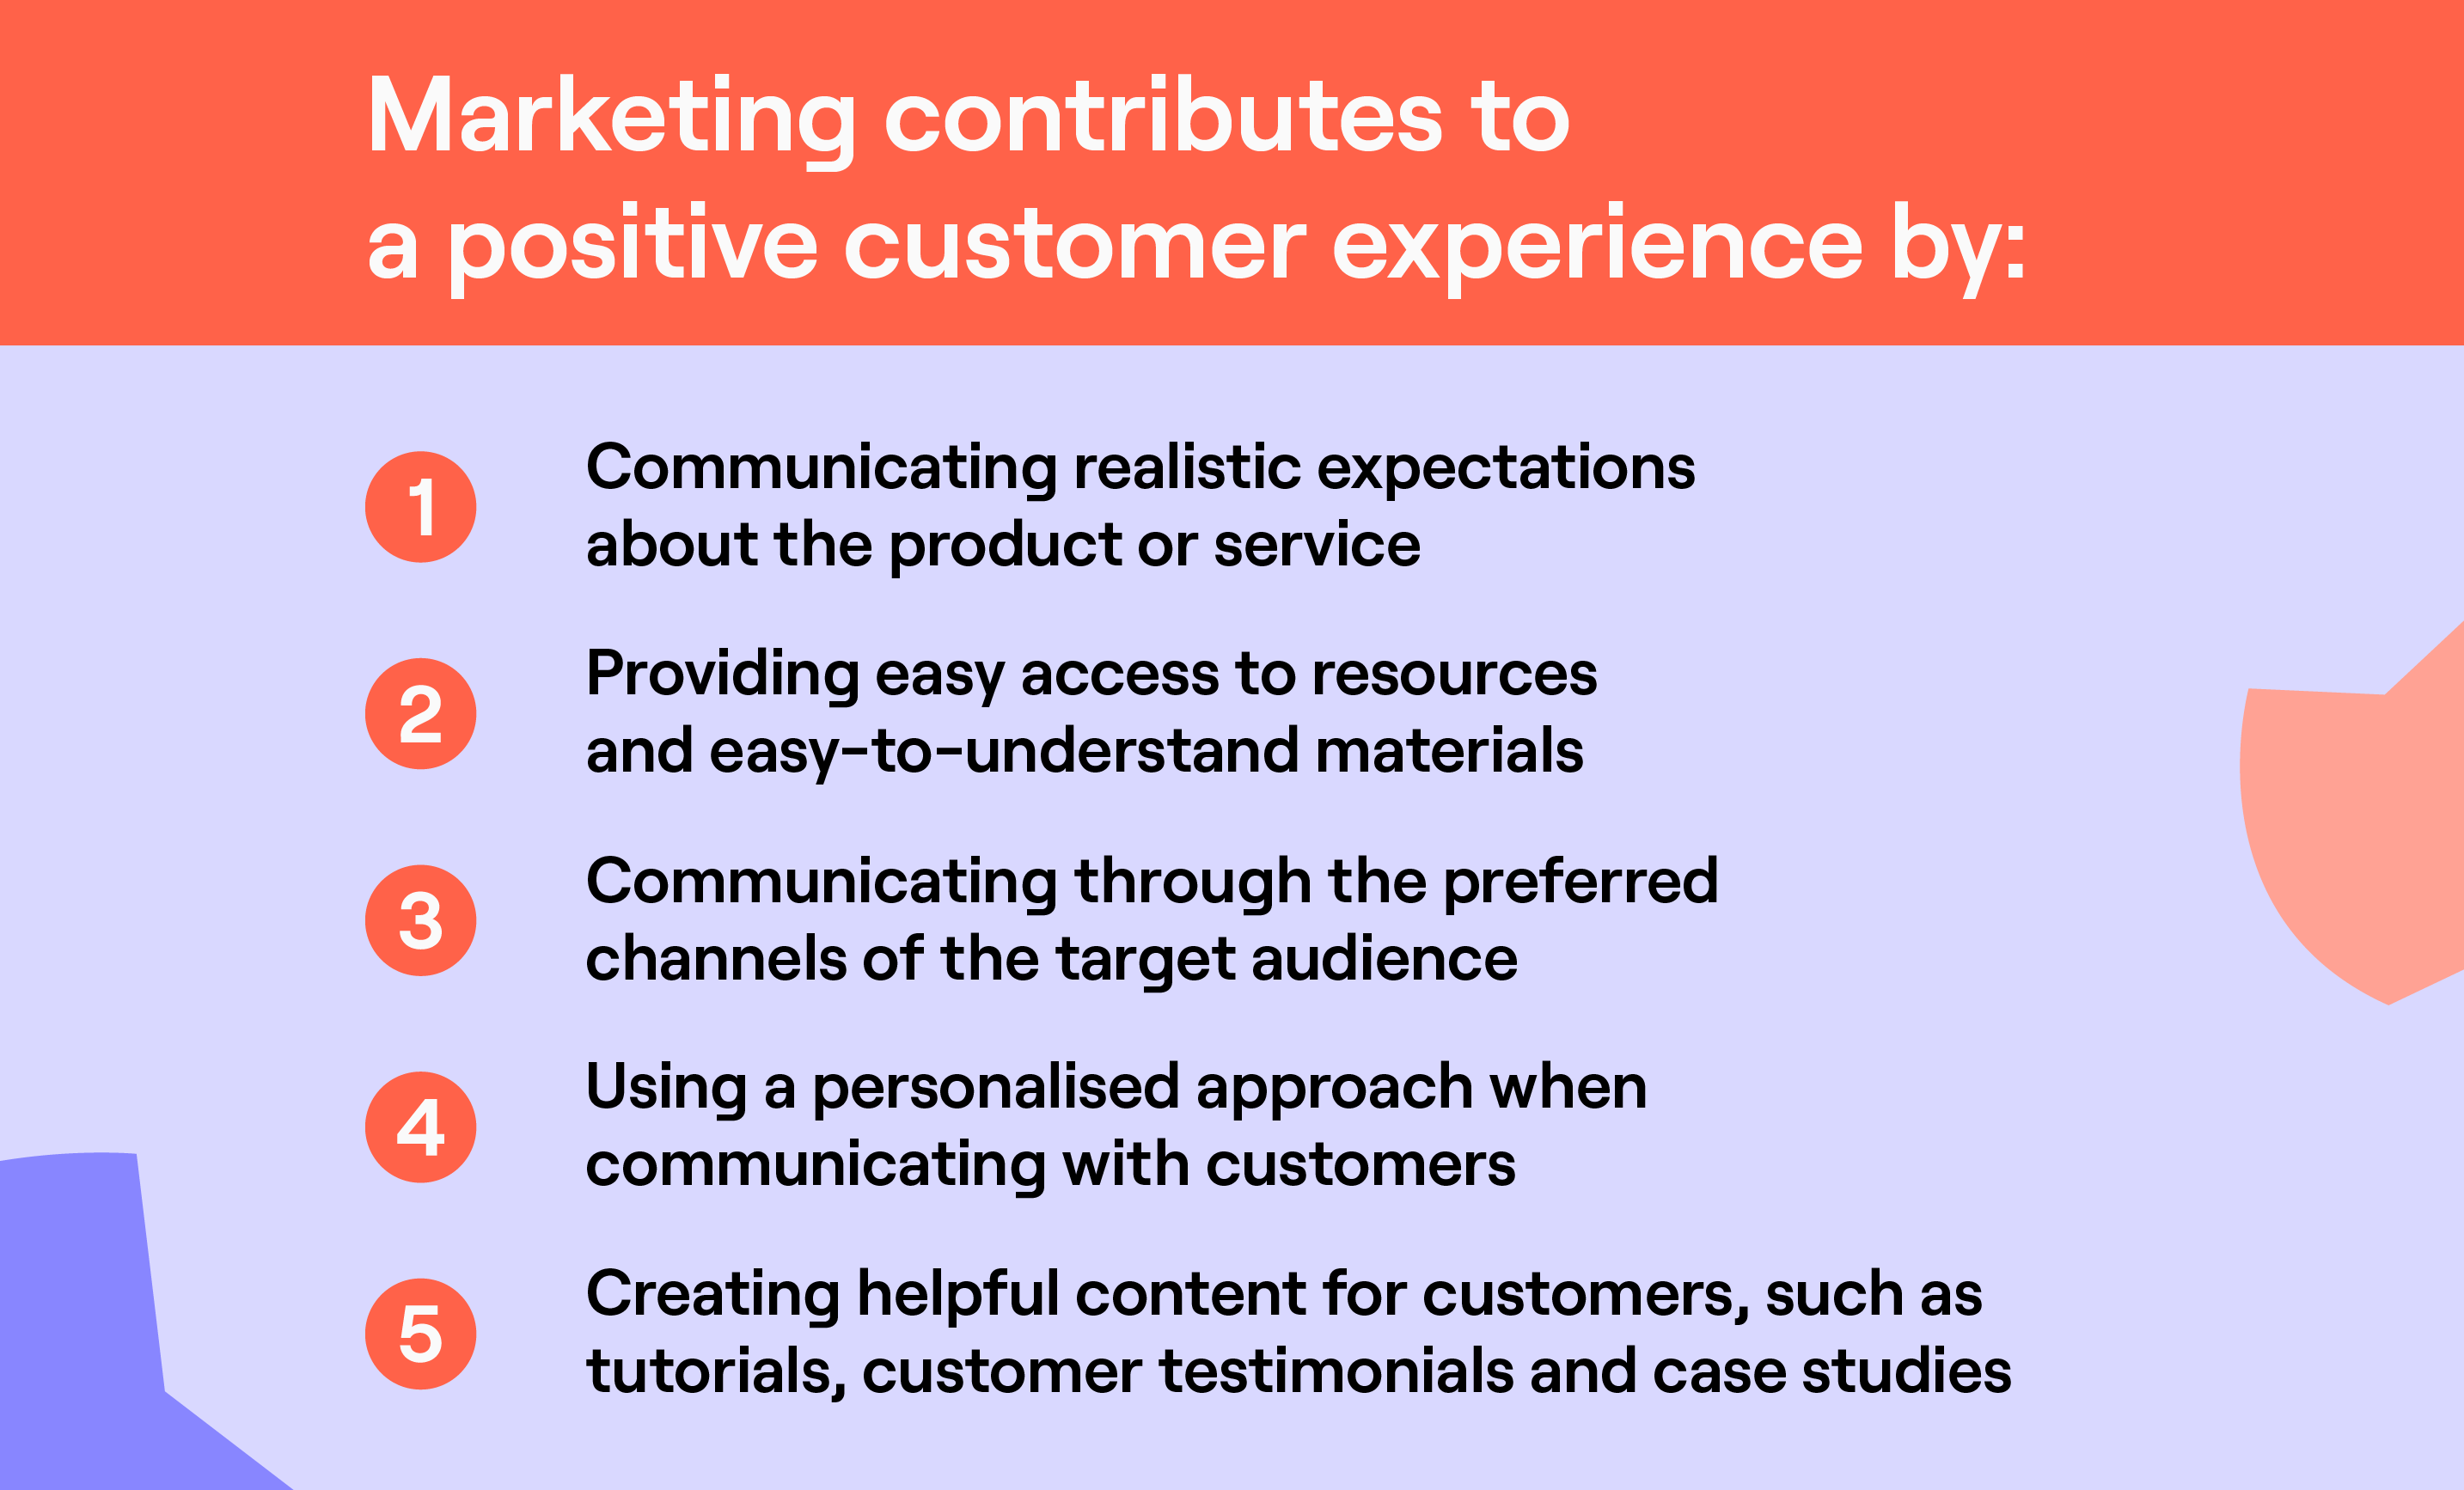 Through customer-oriented content, marketing positively influences the customer experience.